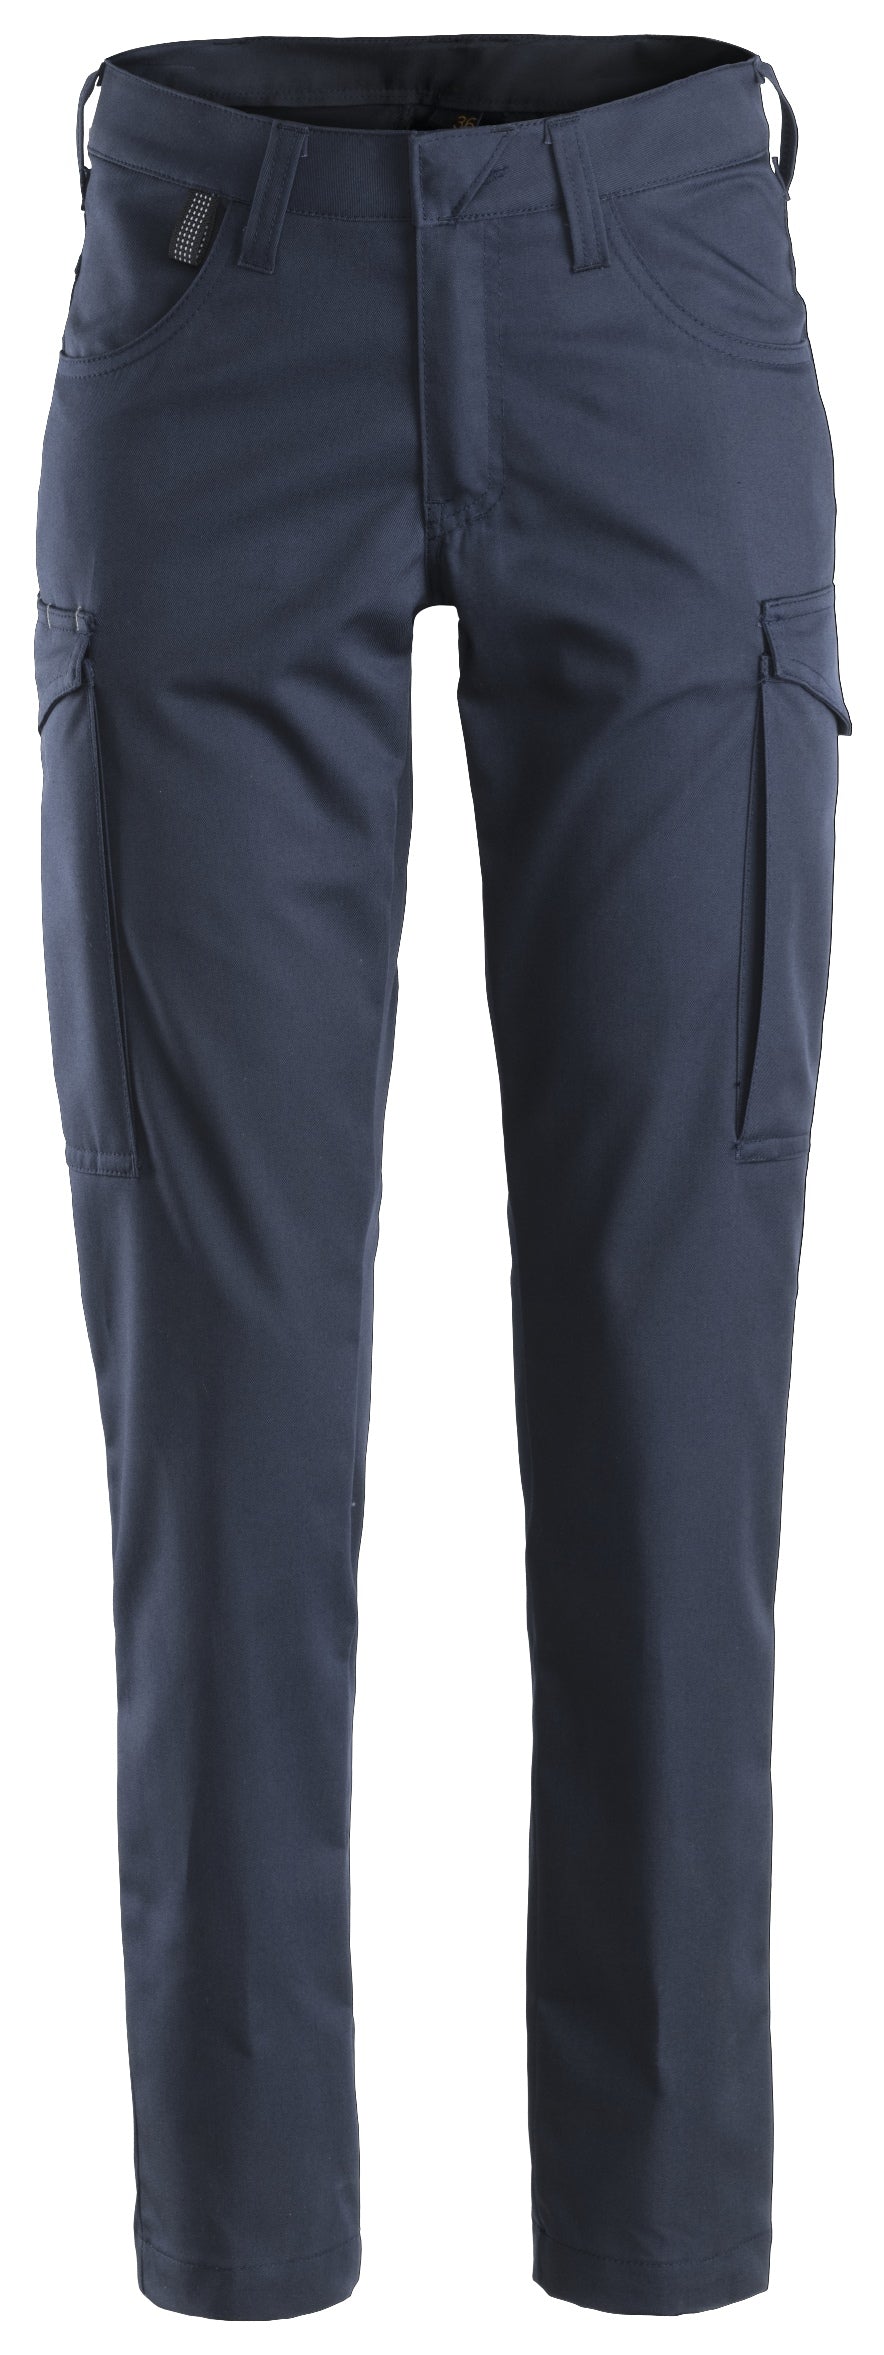 Snickers 6700 Womens Service Trousers Navy